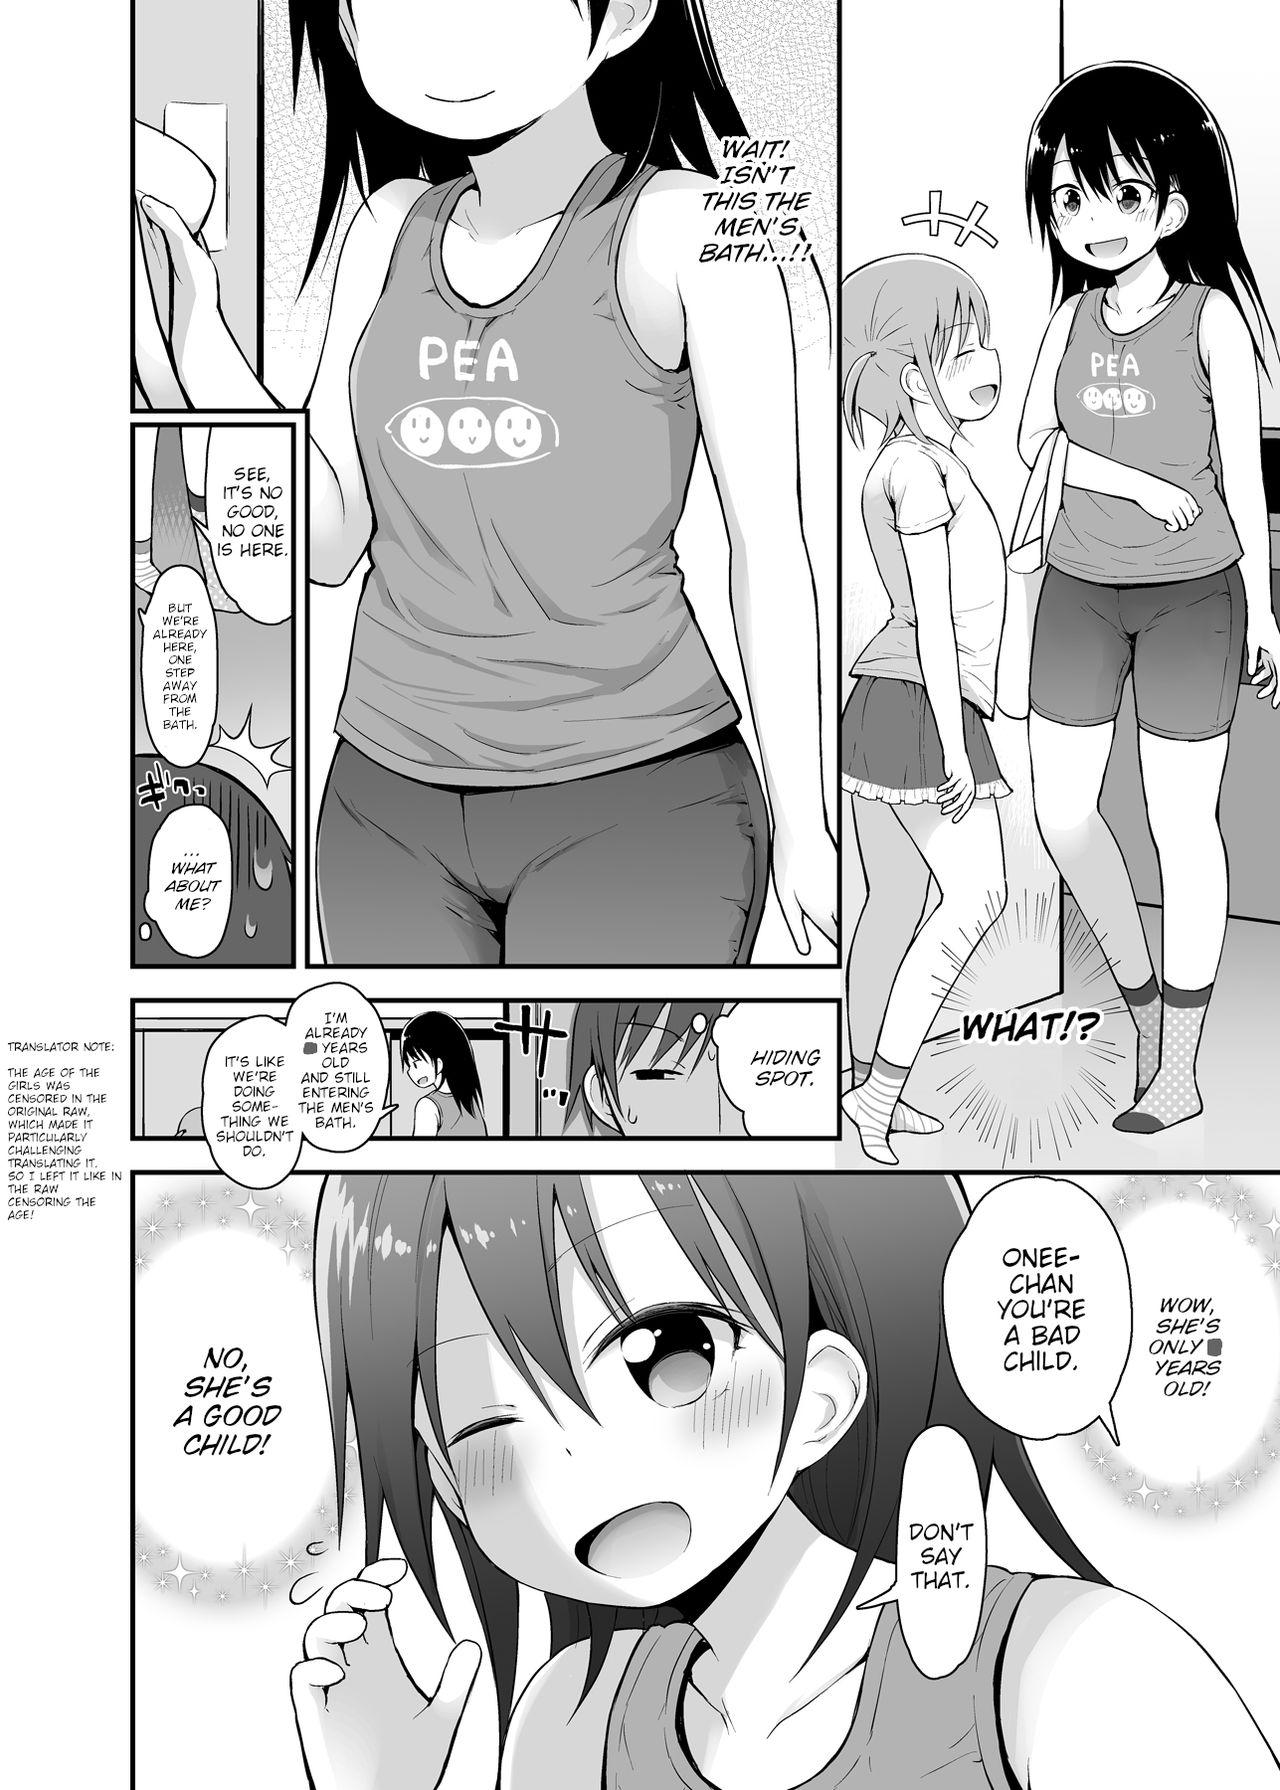 Penetration Onnanoko datte Otokoyu ni Hairitai 3 | They may just be little girls, but they still want to enter the men's bath! 3 - Original Bro - Page 3